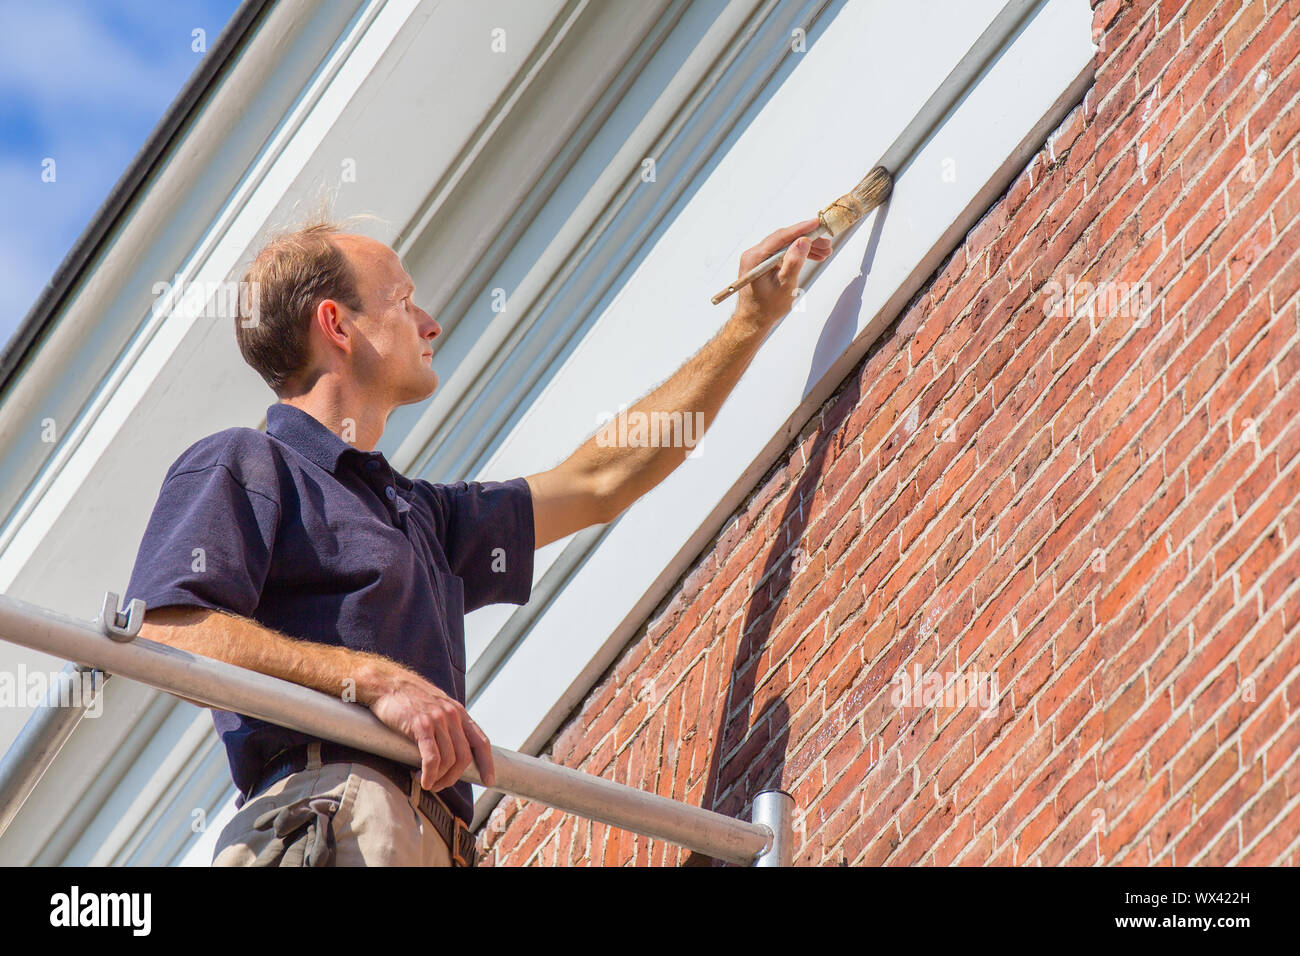 Caucasian painter painting  roof molding with brush Stock Photo